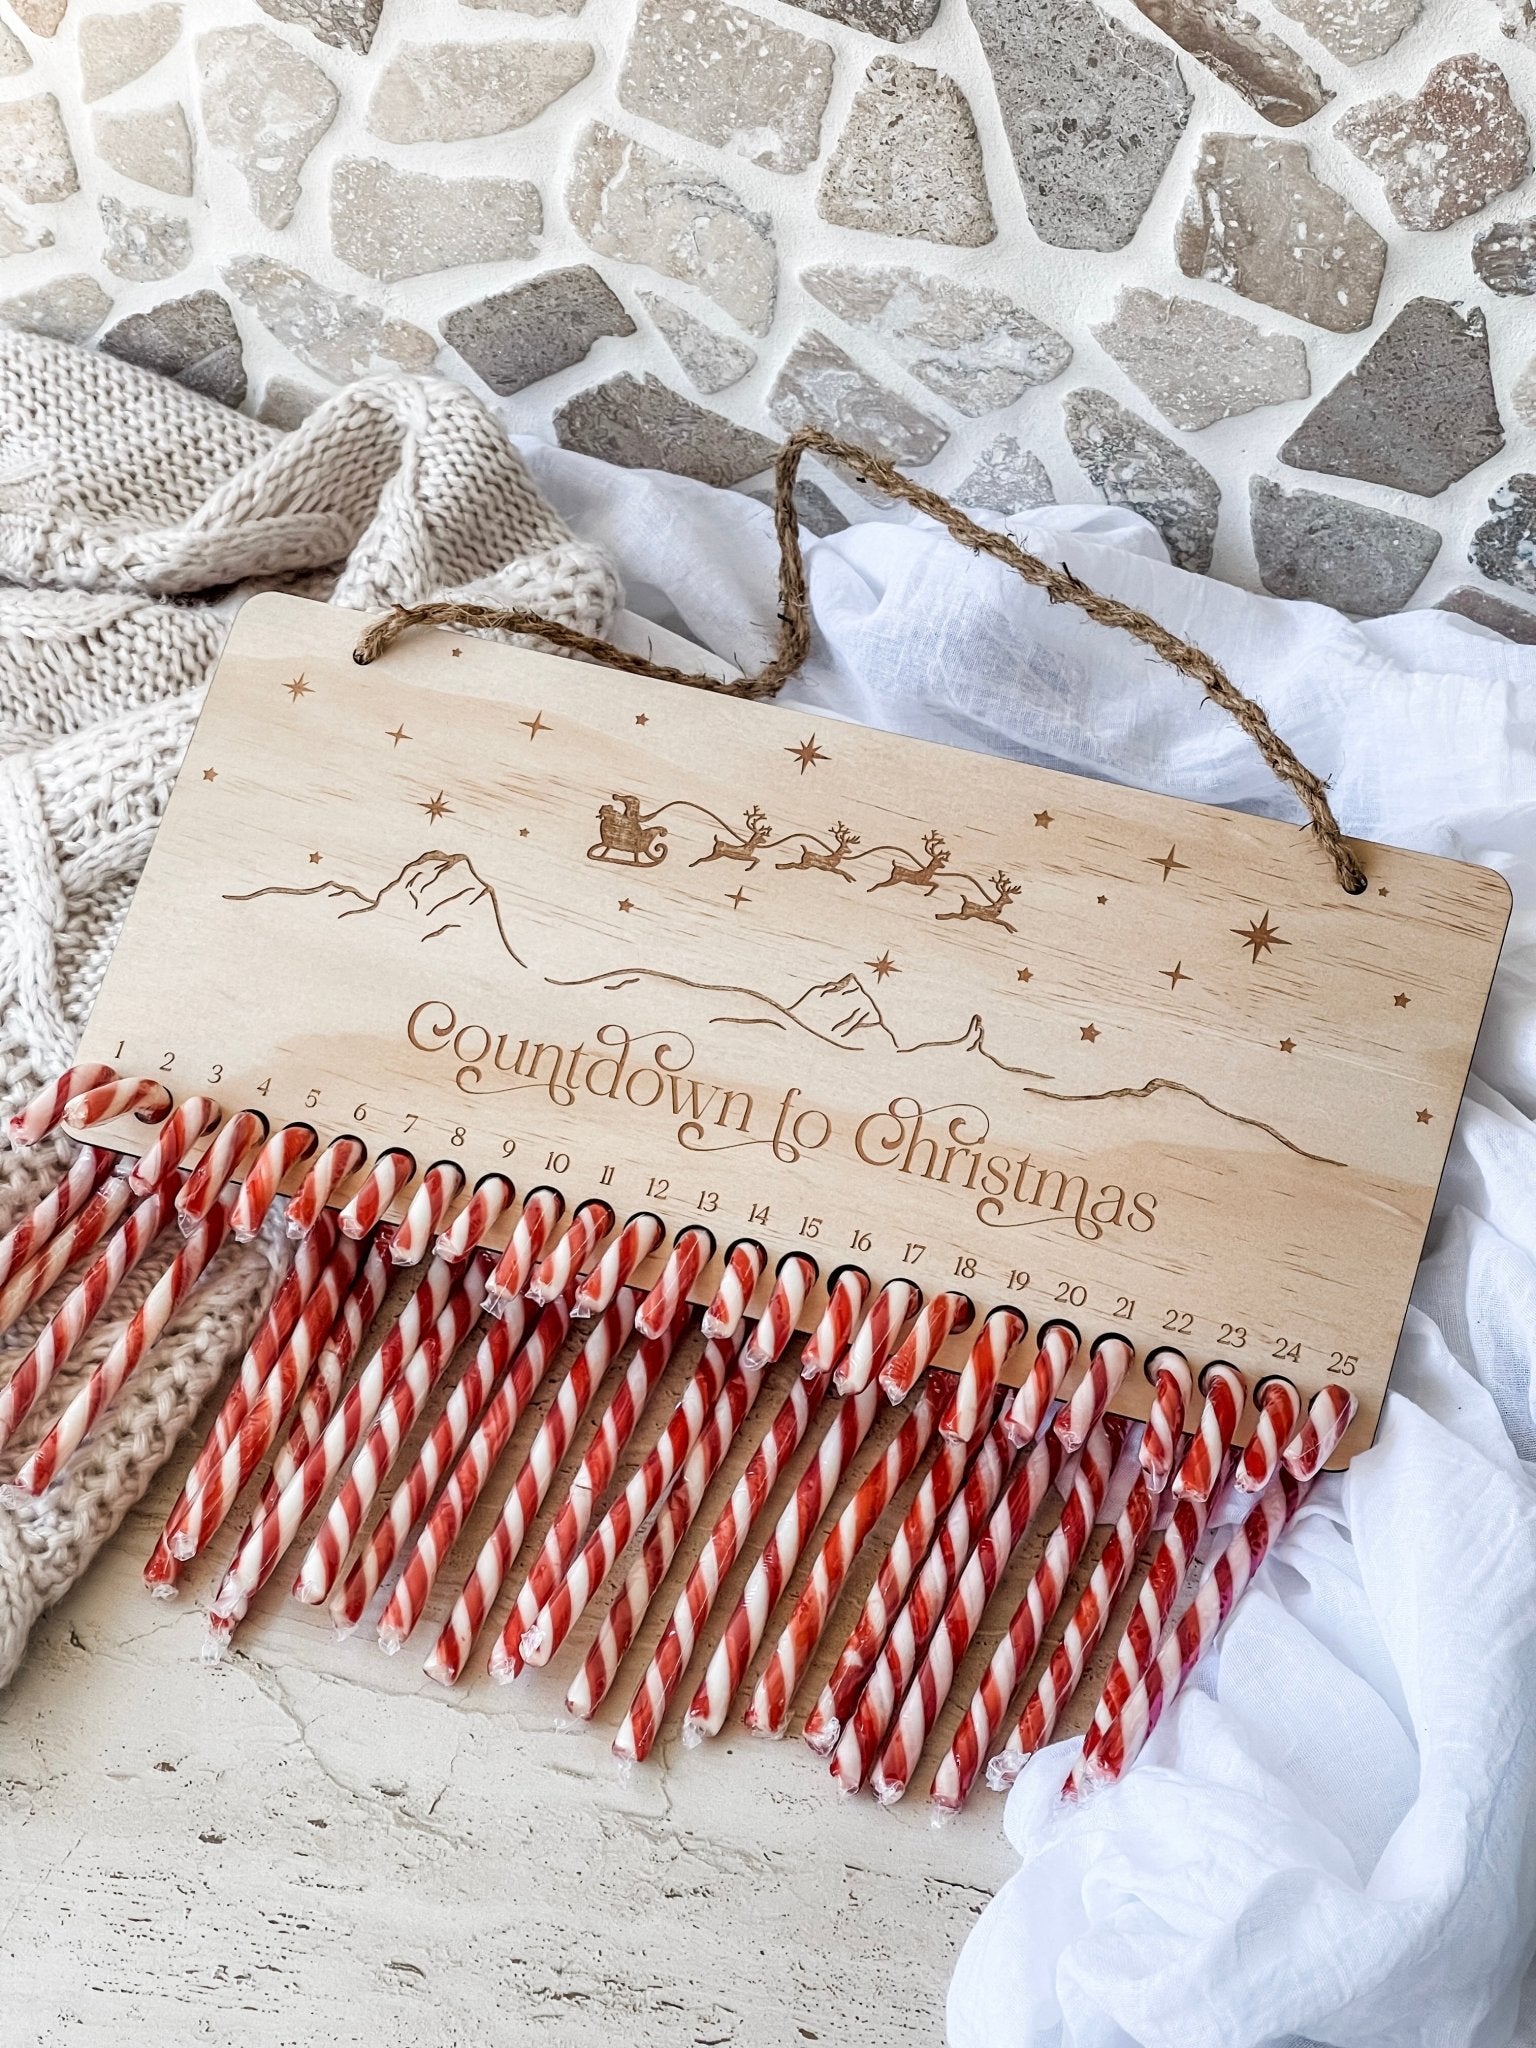 Countdown to Christmas - Candy Cane Style - The Humble Gift Co.